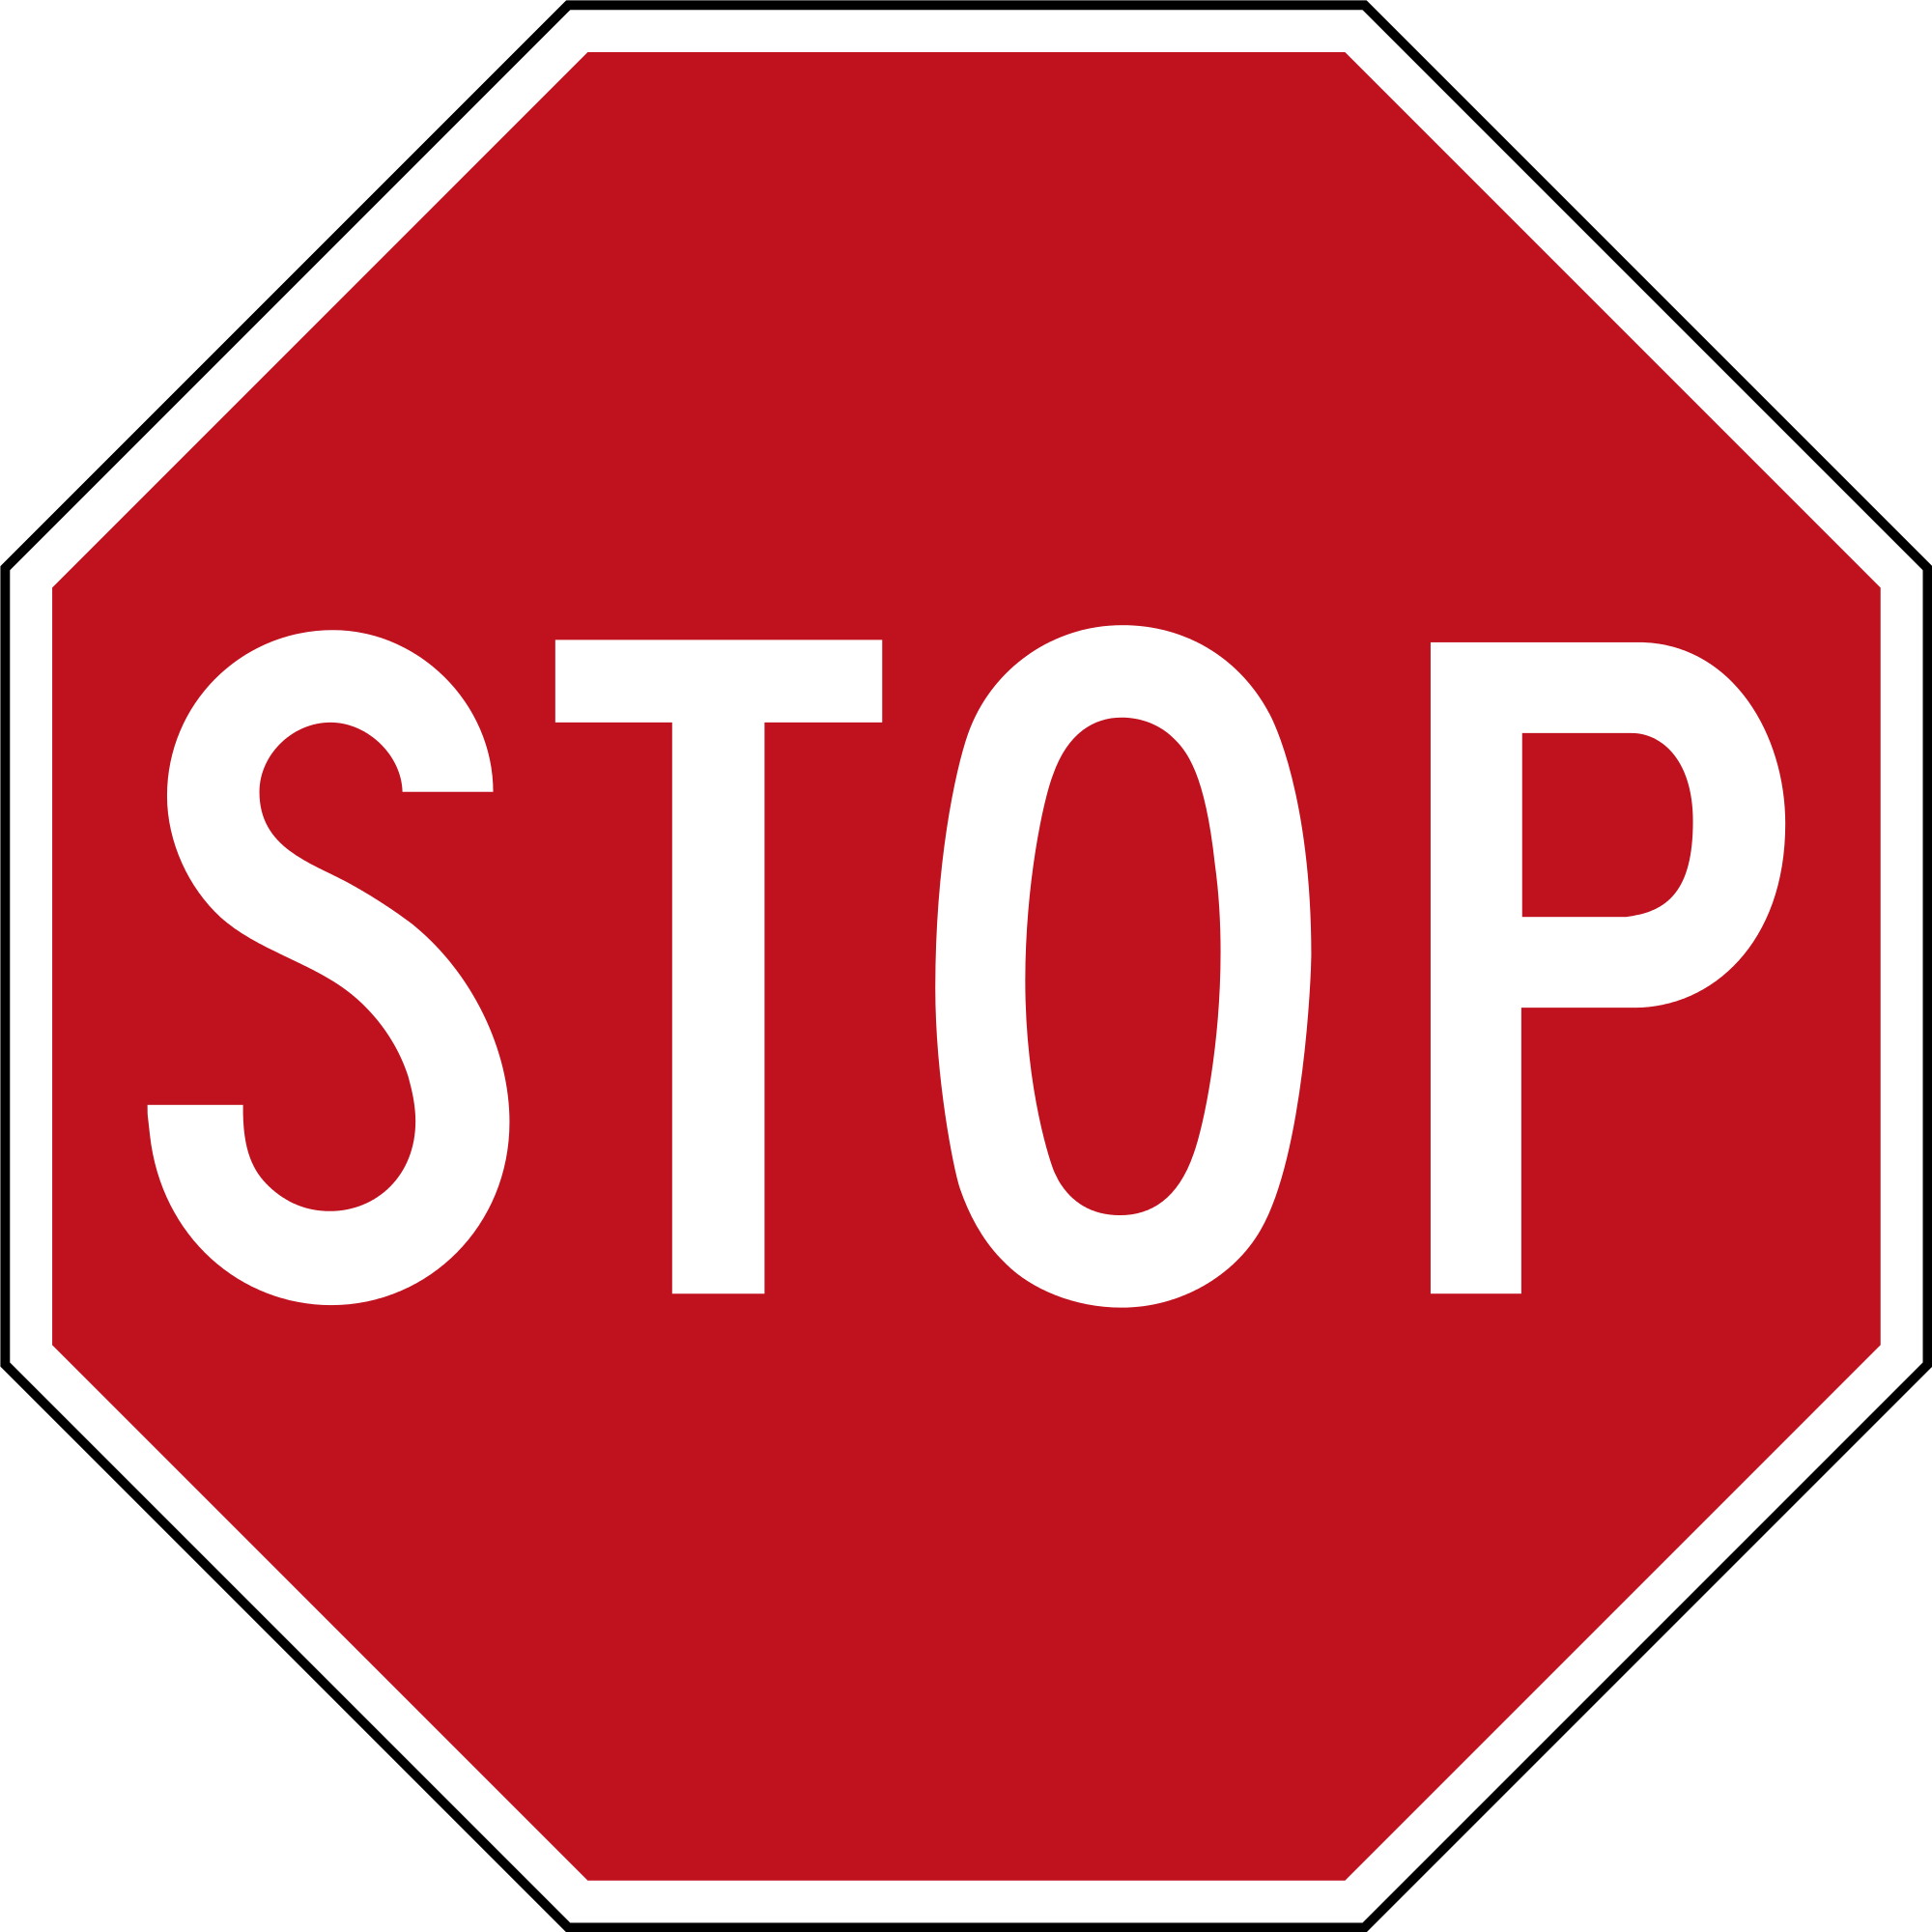 File:Stop sign.svg - Wikimedia Commons